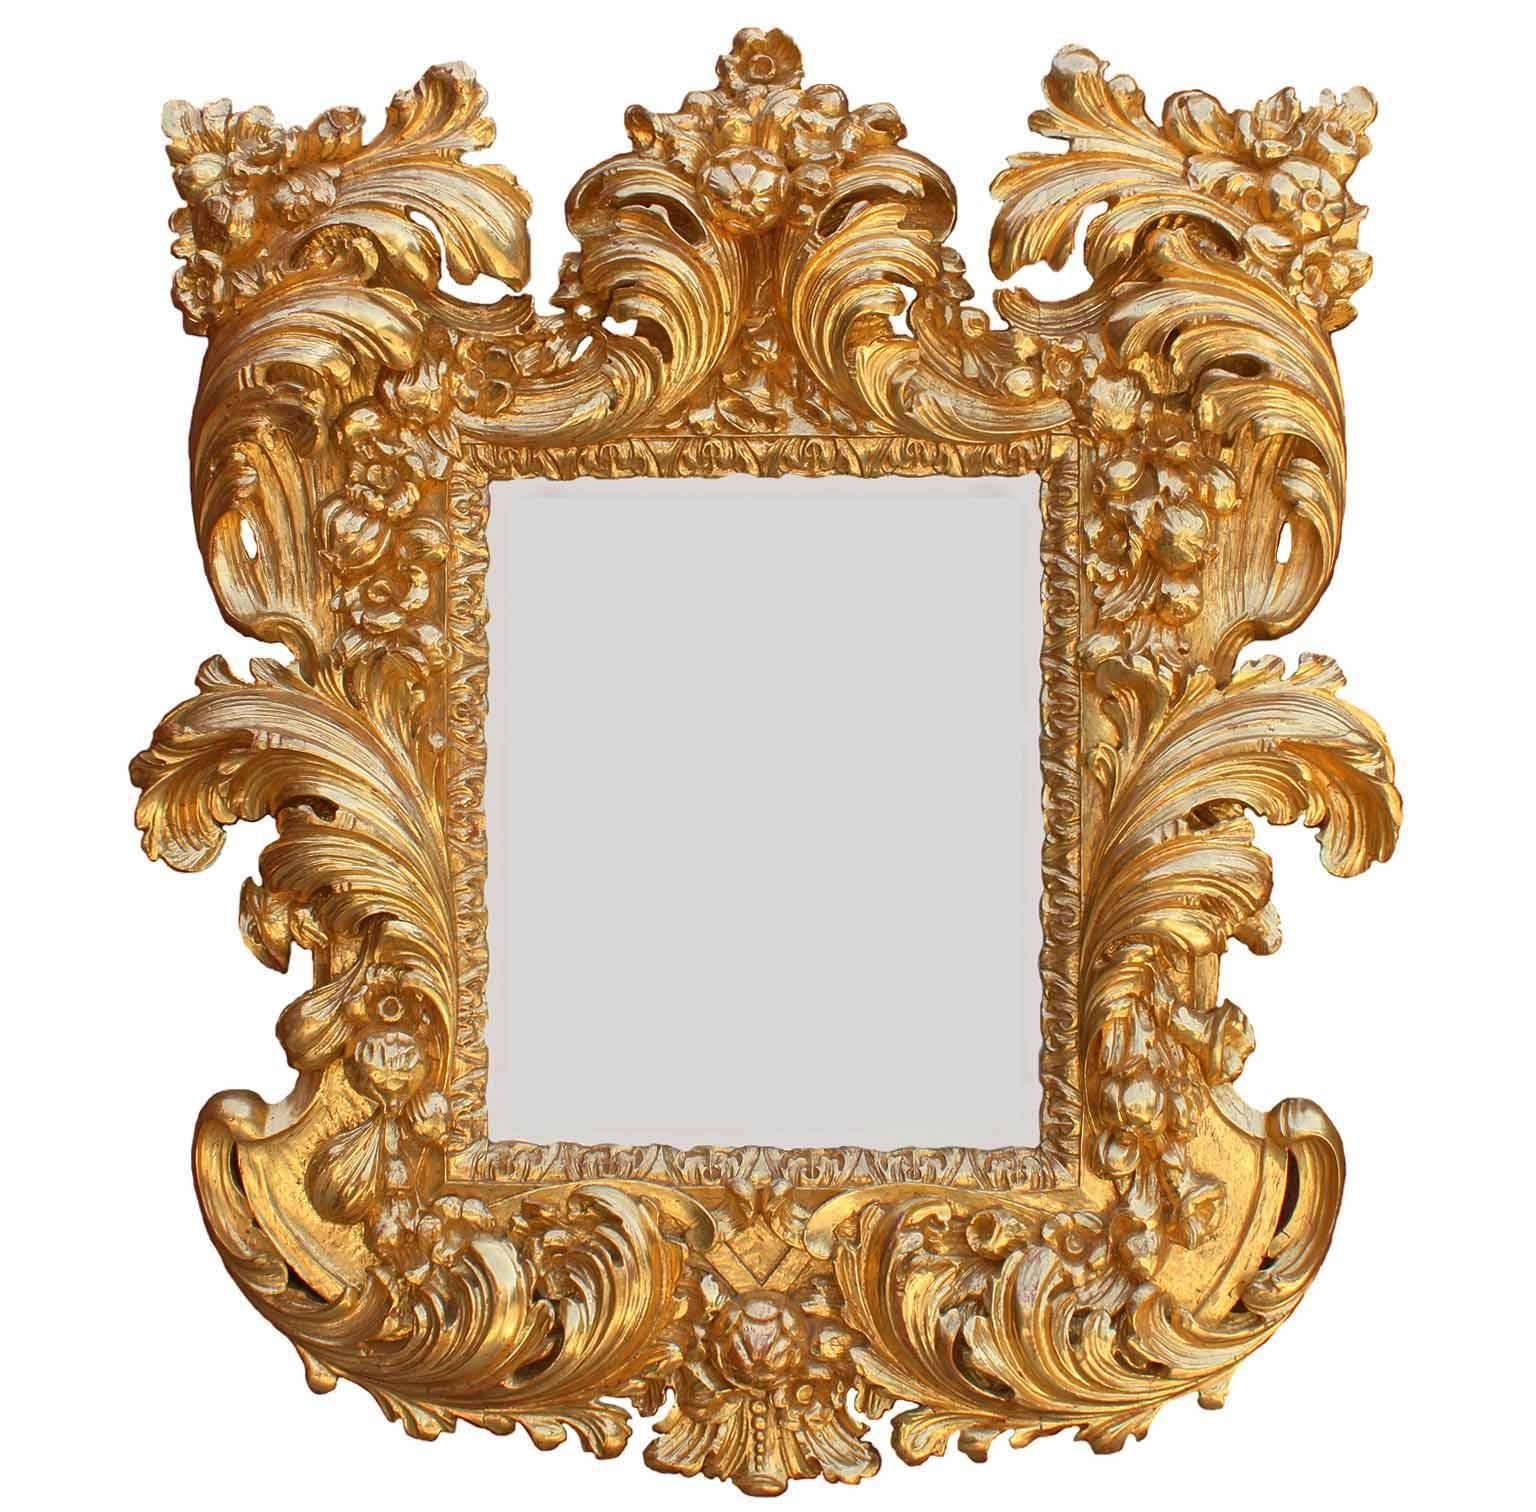 A fine Palatial Italian, 19th century baroque style vigorously carved Florentine giltwood mirror frame. The ornately carved frame with scrolls, acanthus, fruits and floral design, fitted with a later beveled mirror plate. All gilding is 24-carat